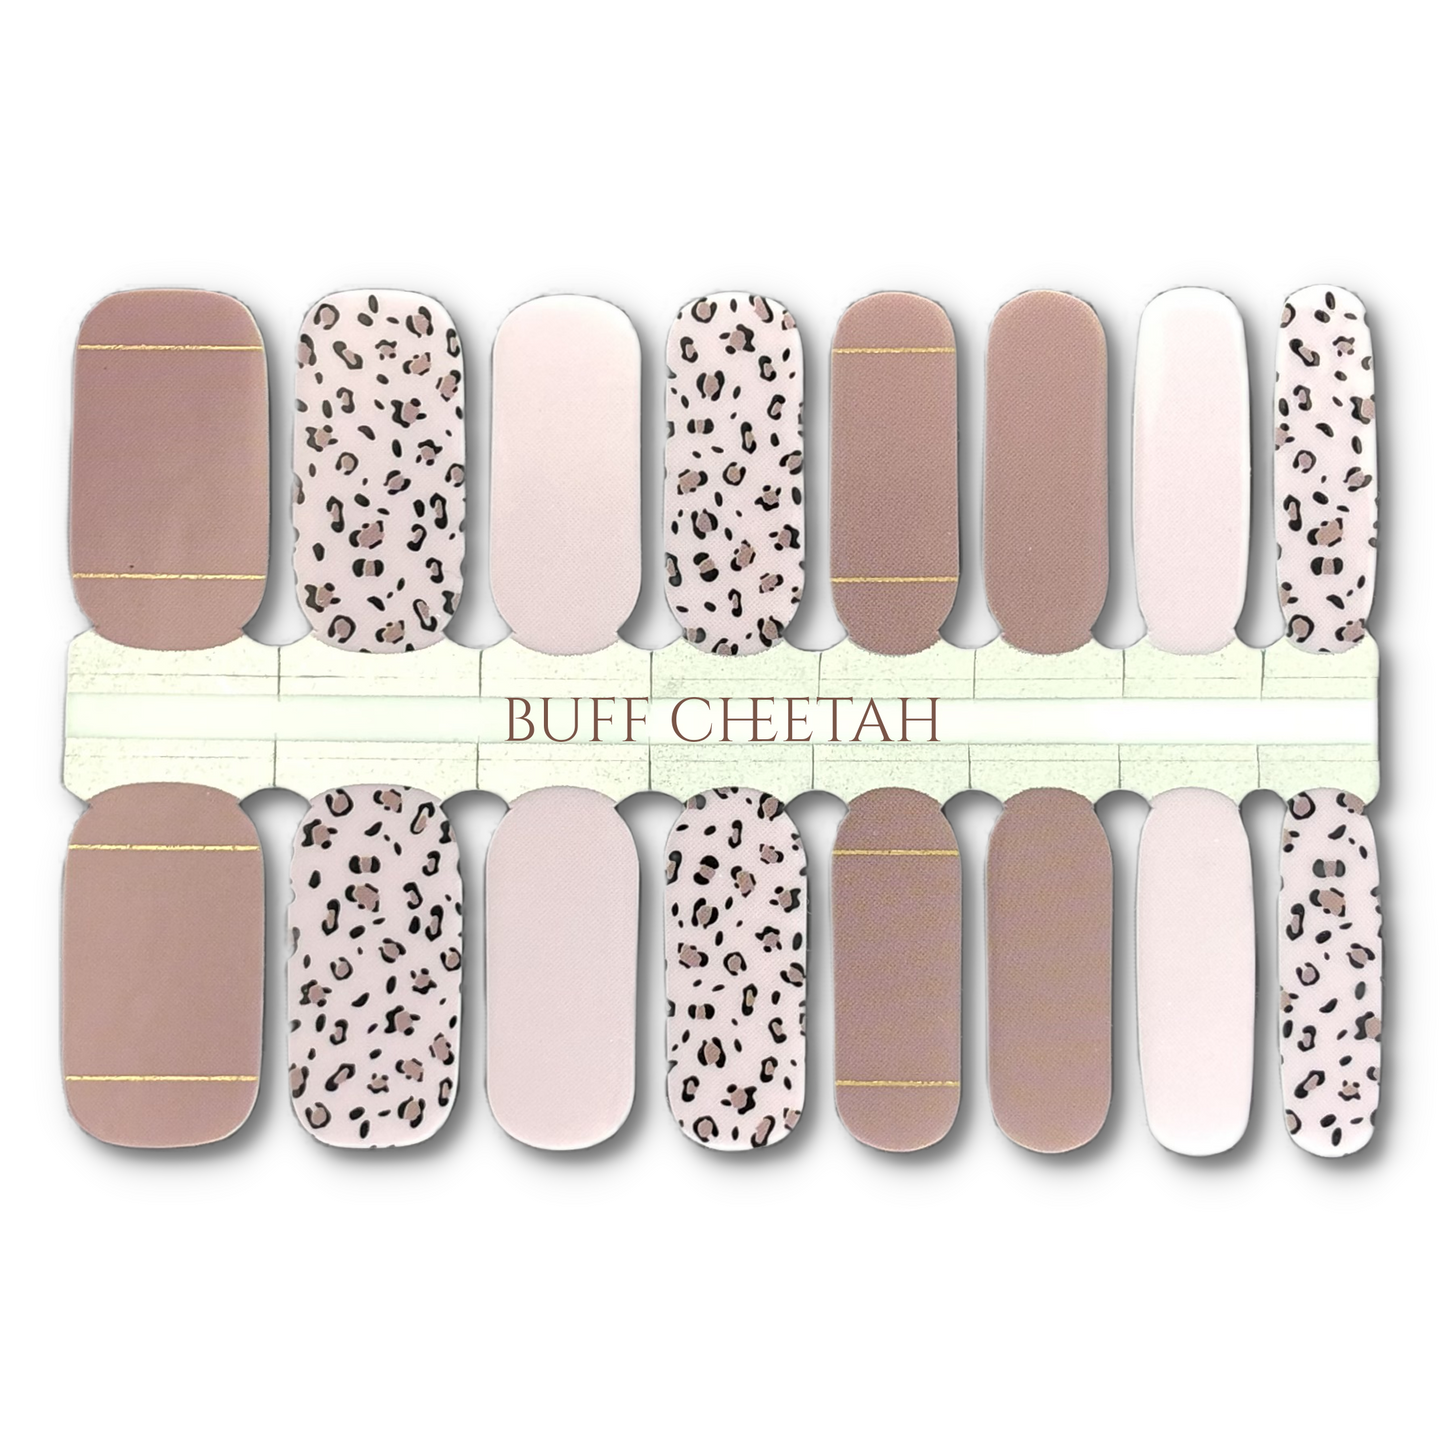 16 Real nail polish strips also called nail wraps or nail stickers. Warm neutral pinks with metallic gold accents and cheetah print accent strips.